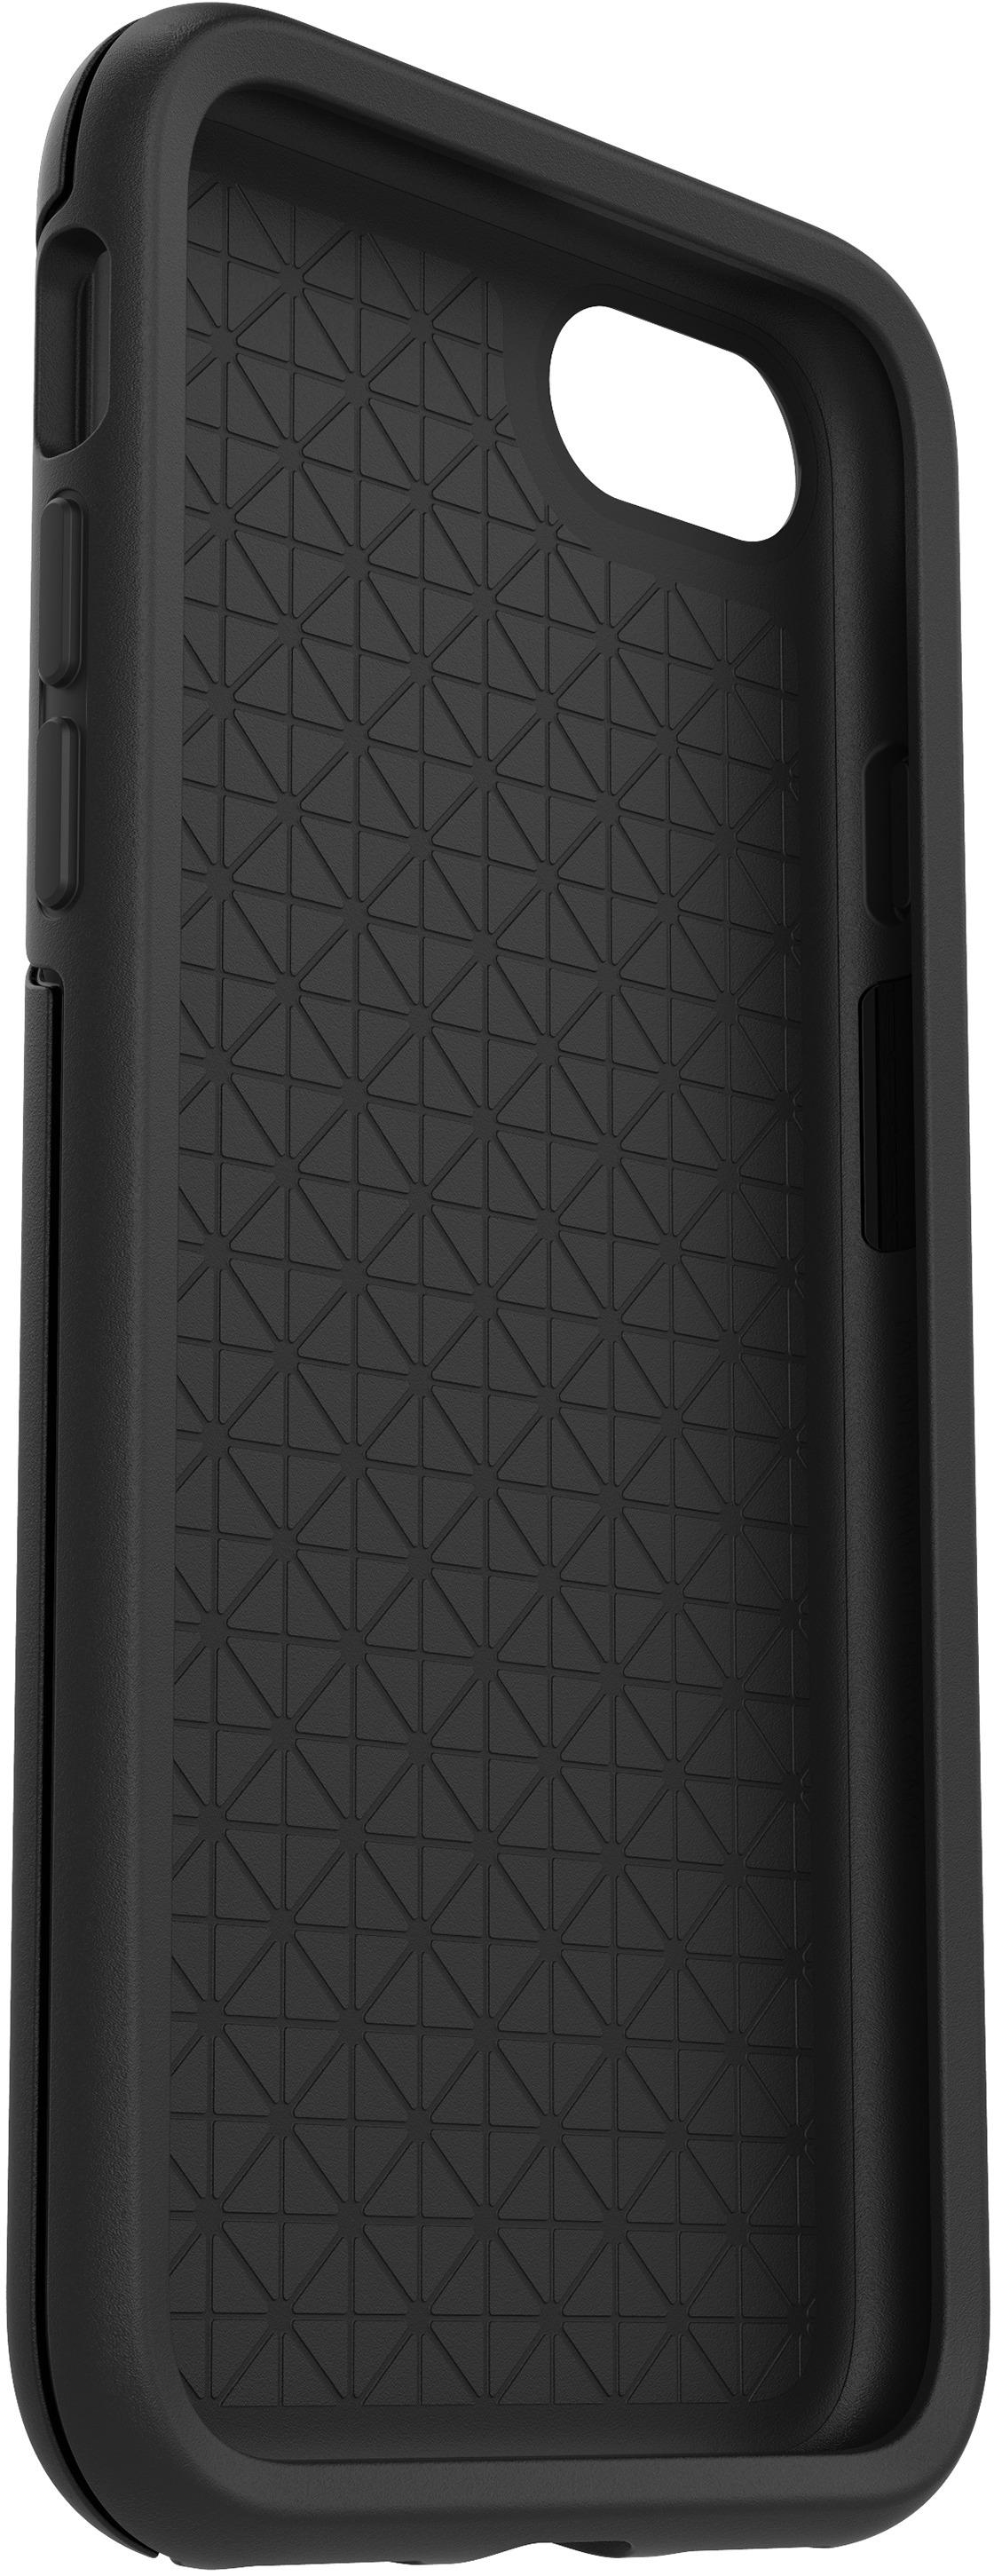 OtterBox Symmetry Series Hard Shell Case for Apple iPhone 7, 8 and SE ...